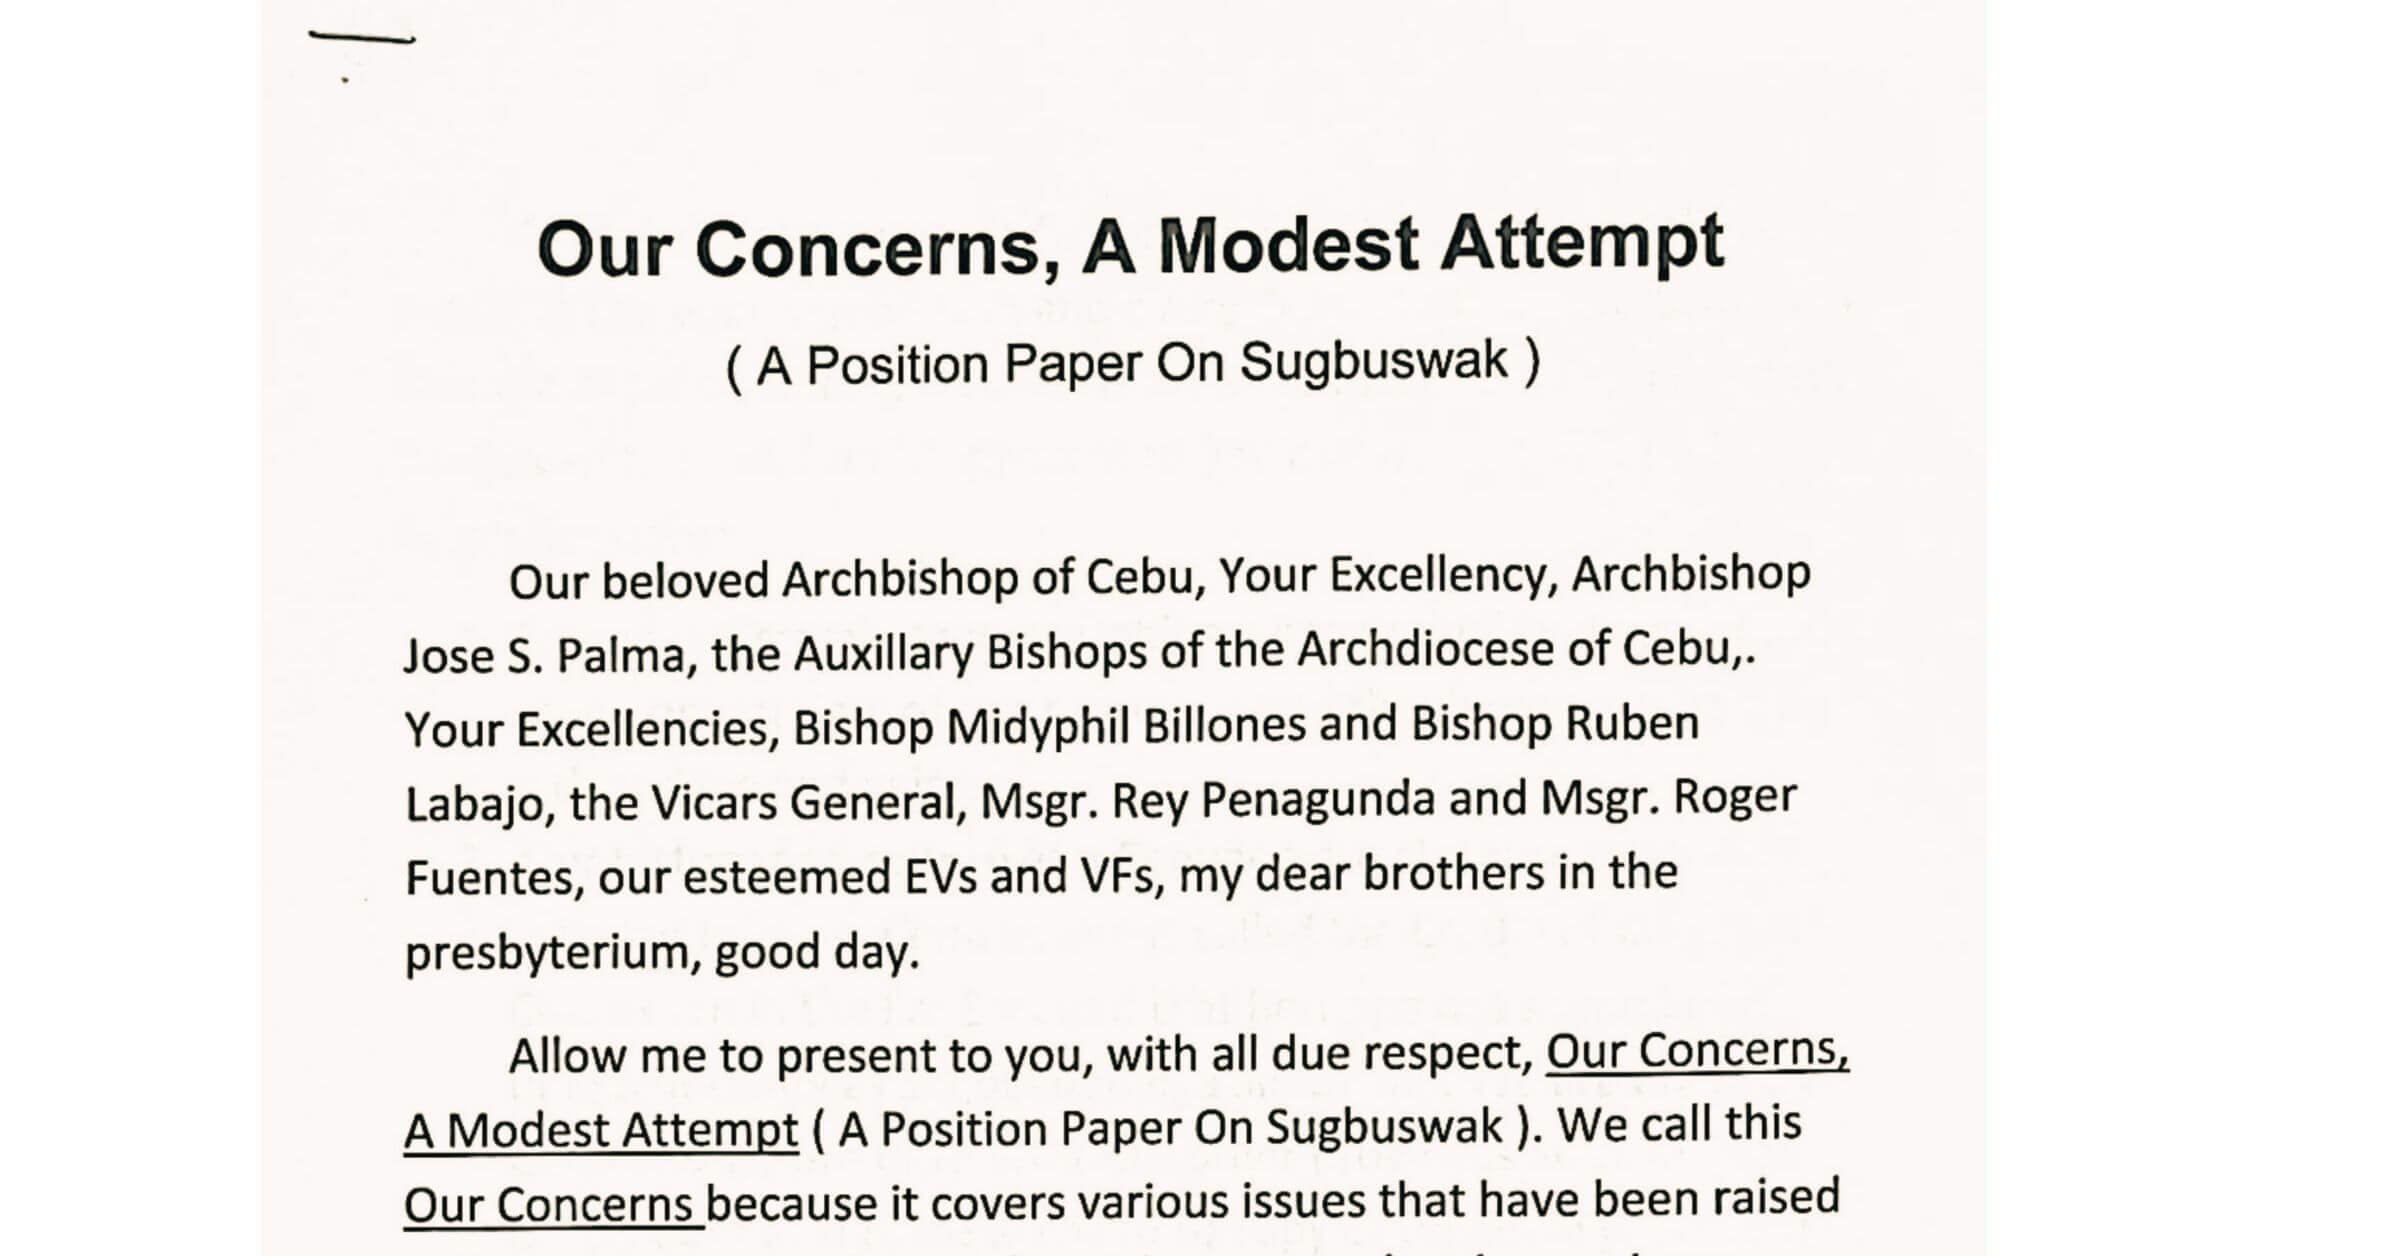 Study keeping the Archdiocese of Cebu as is, some priests say in a position paper